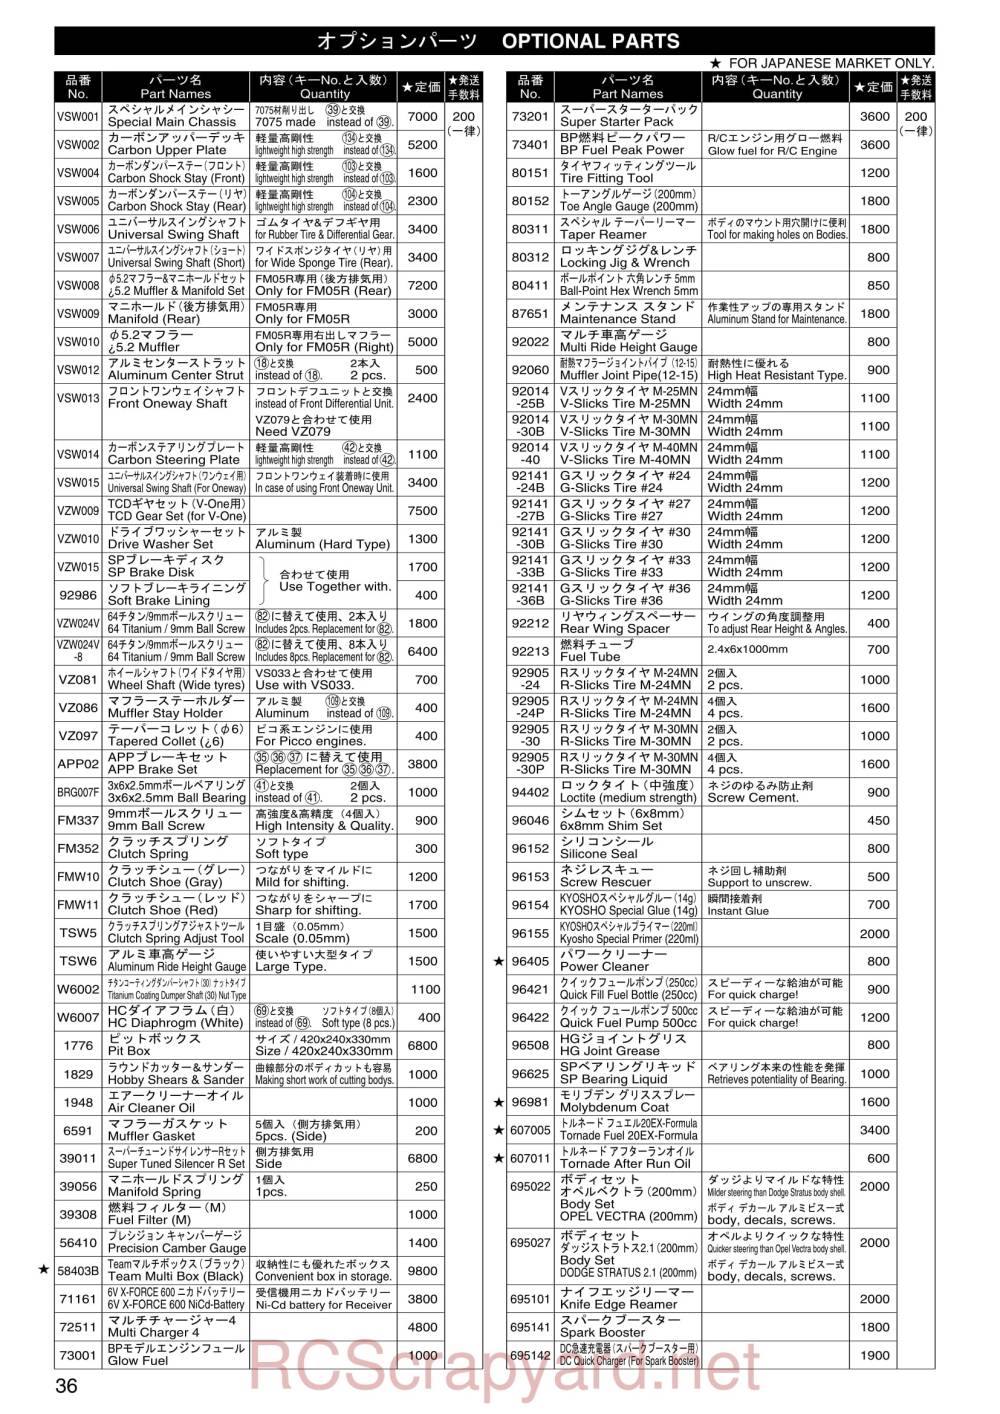 Kyosho FW-05R - Parts - Page 3